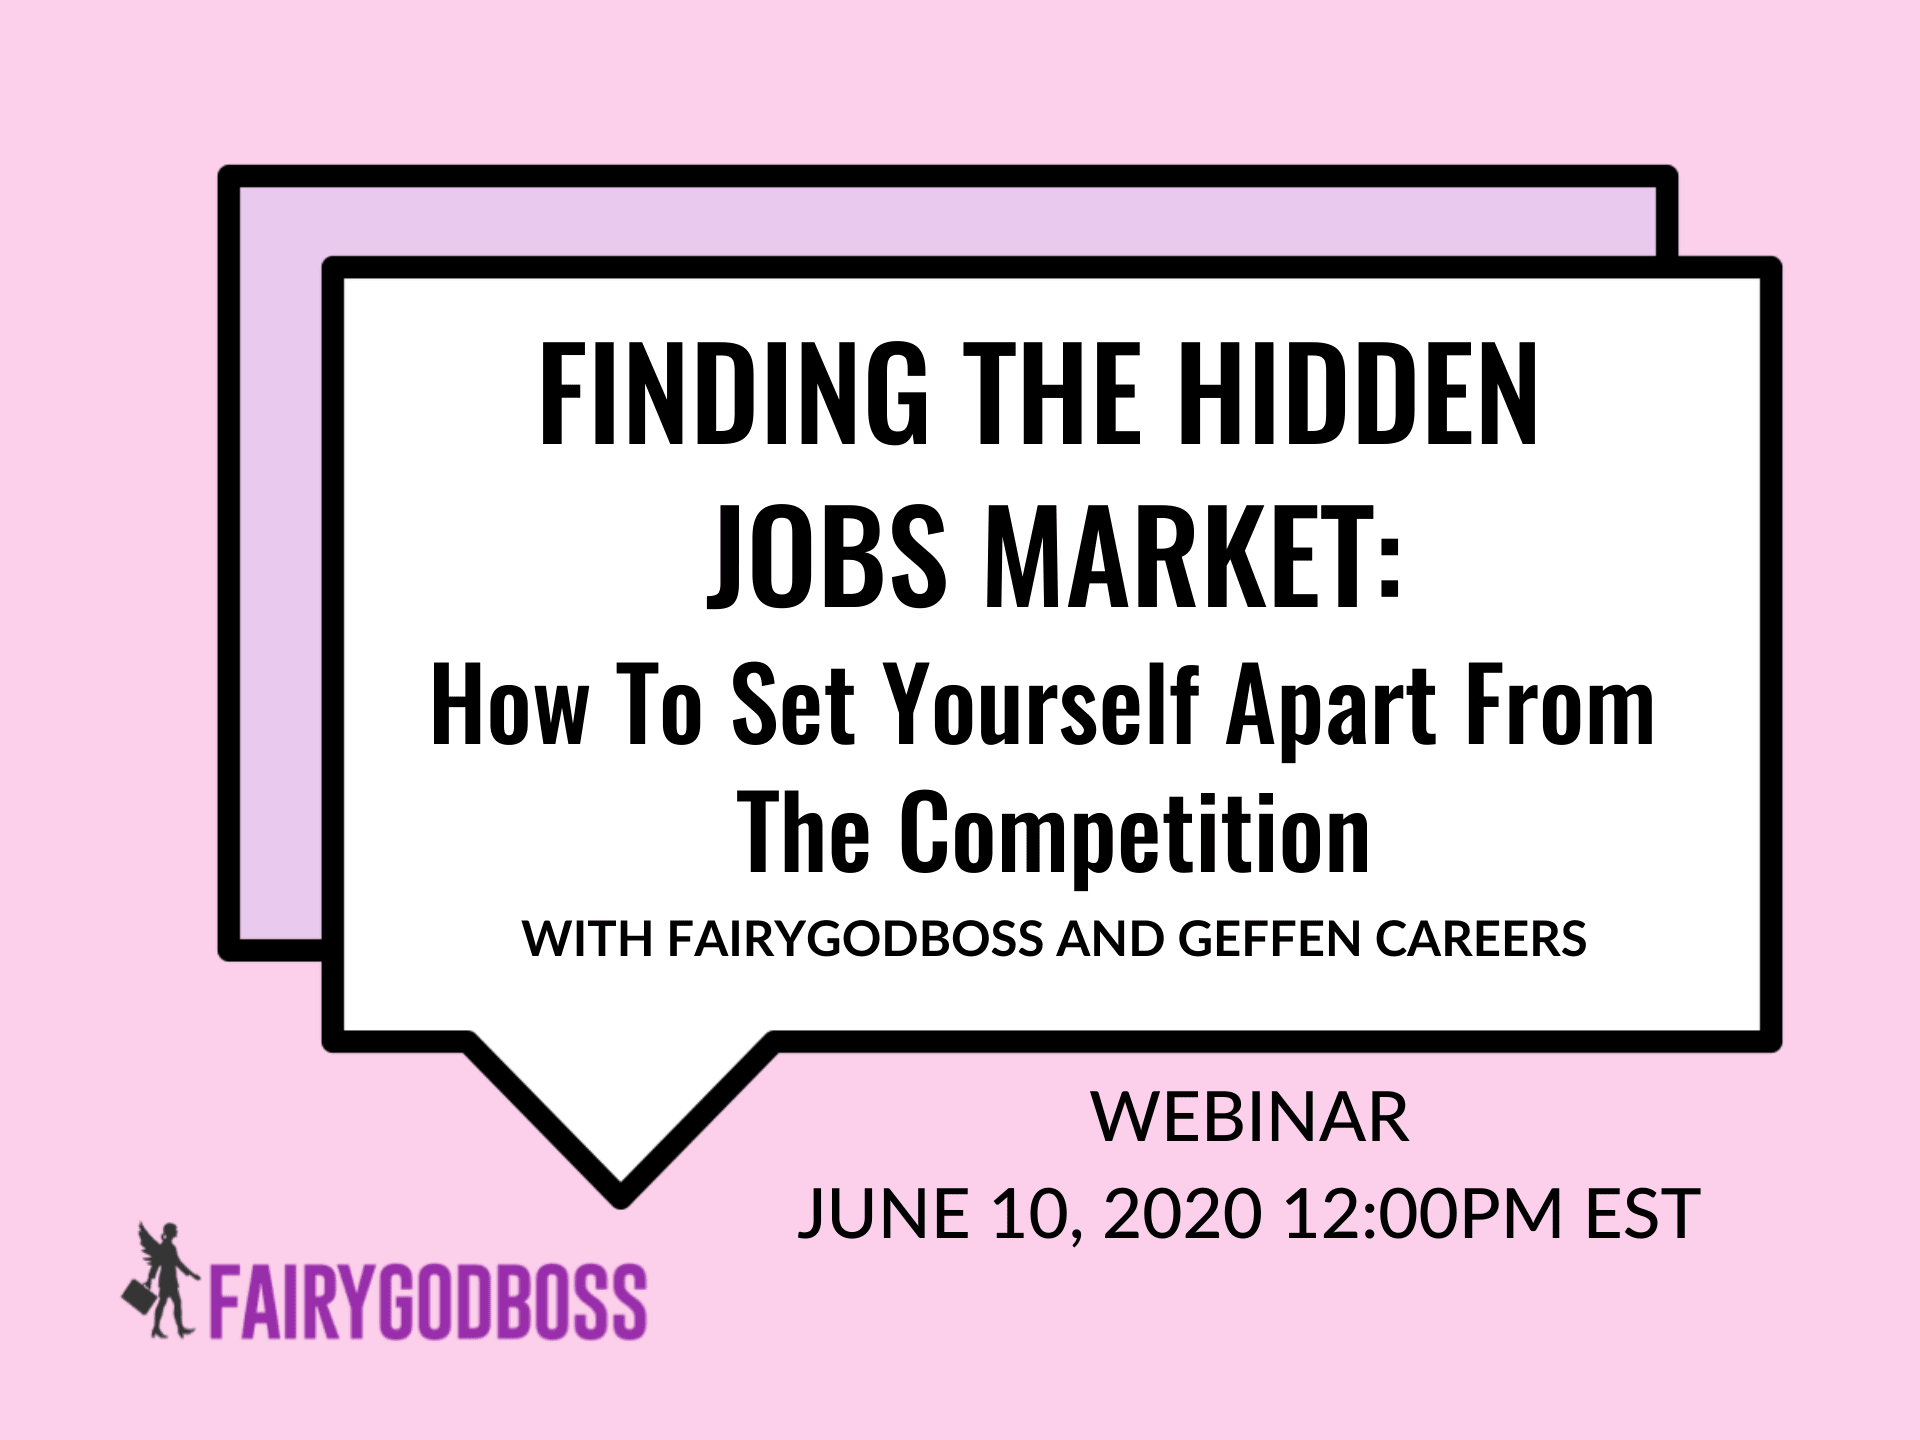 Finding The Hidden Jobs Market: How To Set Yourself Apart From The Competition